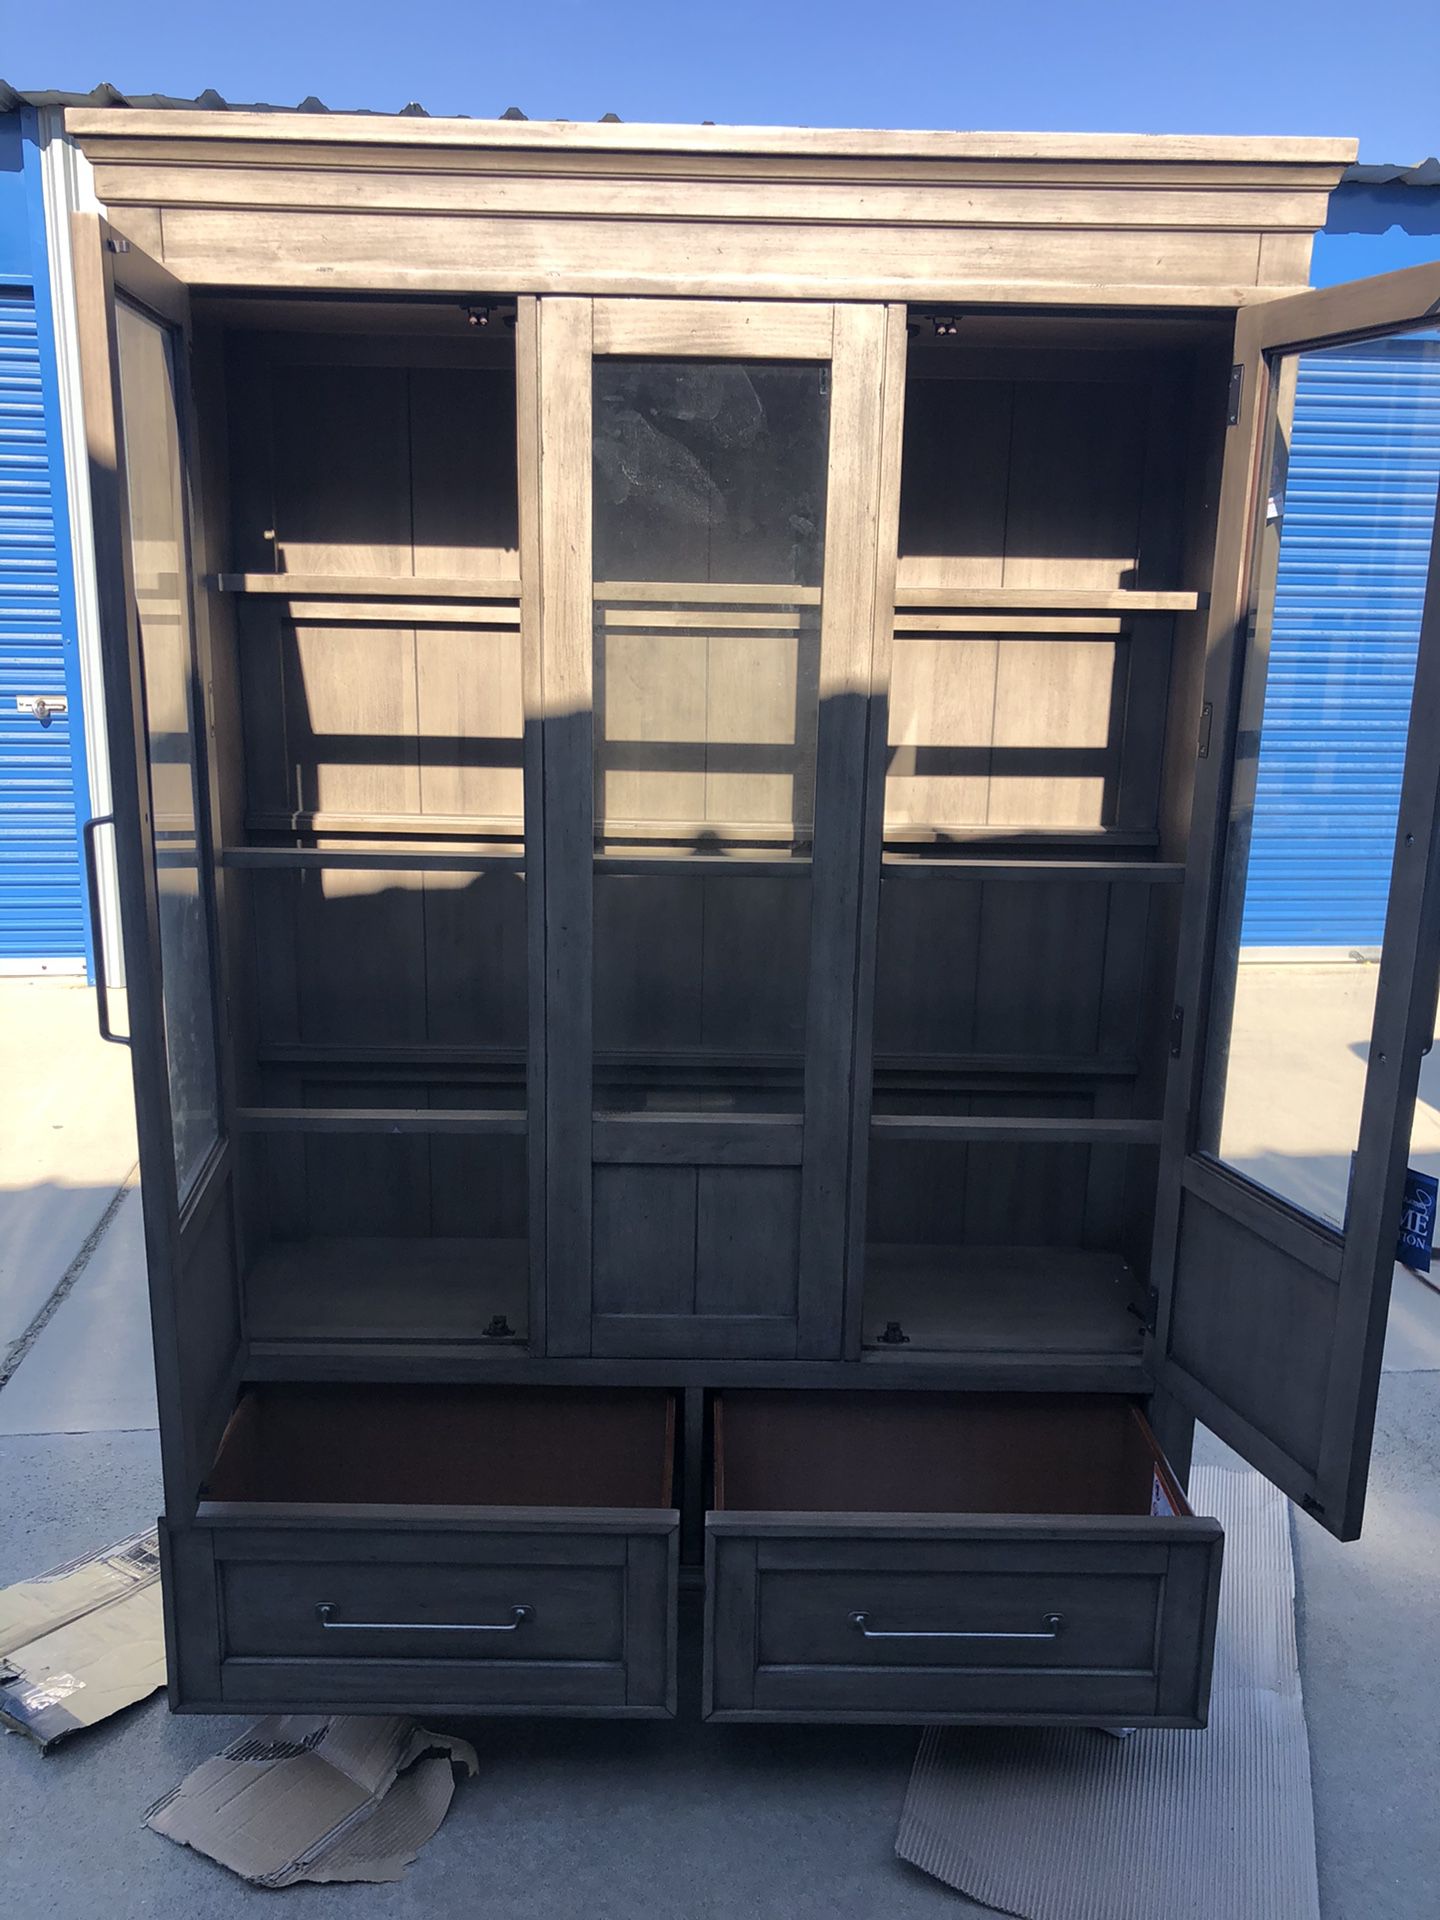 Brand New Floor Model Hutch Cabinet, Rustic Grey Color, Retails For Over $1100